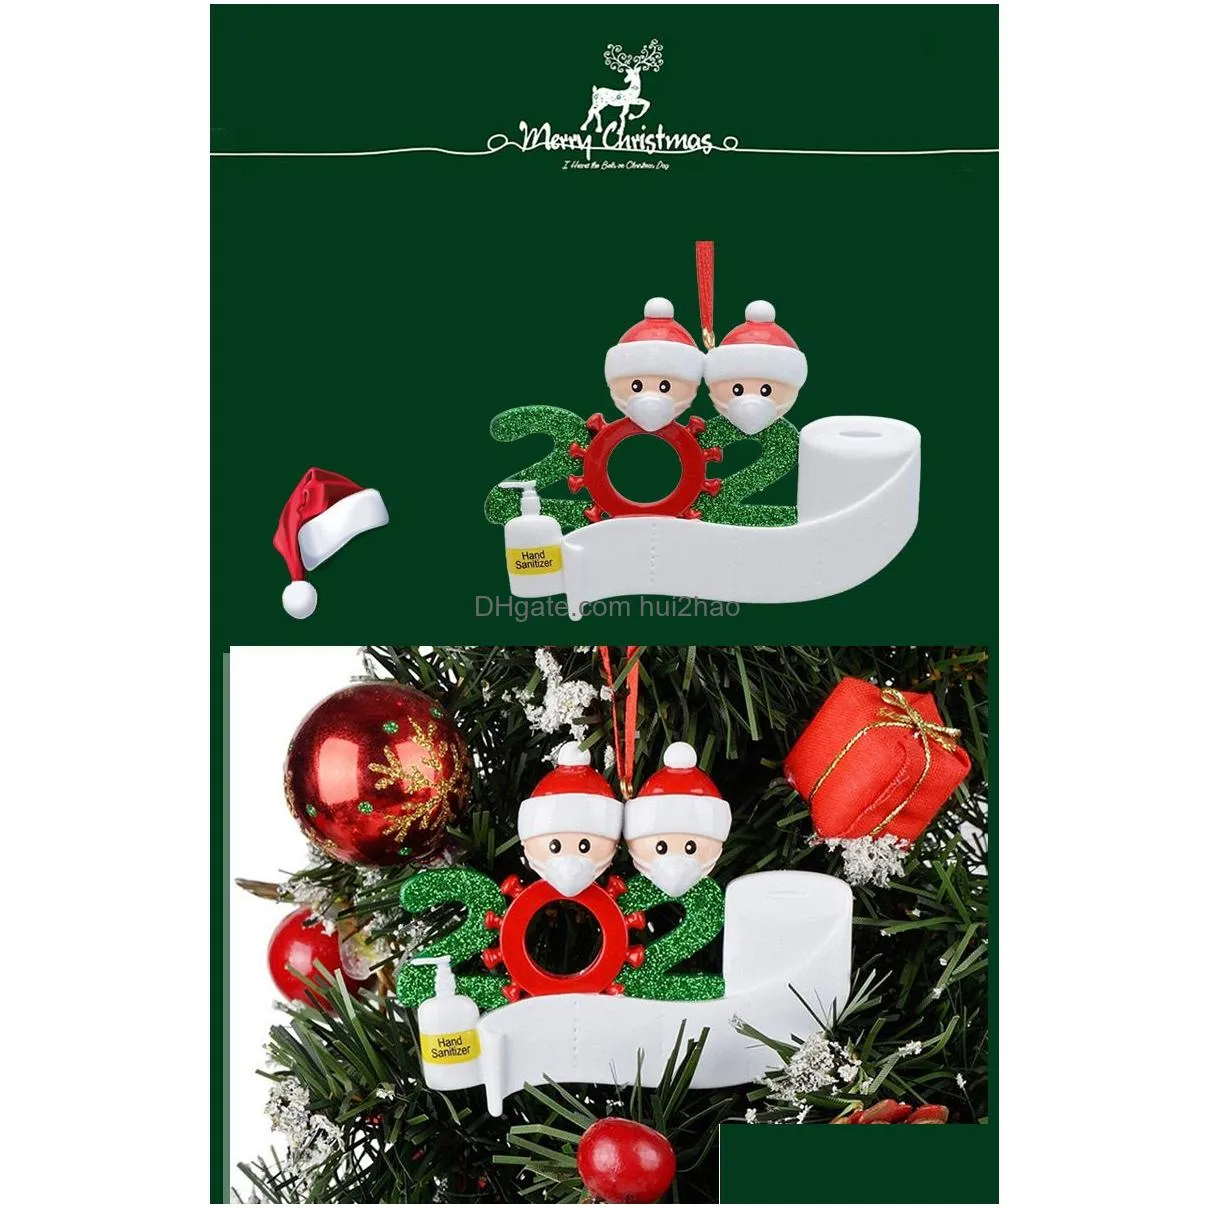 christmas ornament customized gift survivor family of 2 3 4 5 6 7 hanging decoration snowman pendant with face mask hand sanitizer